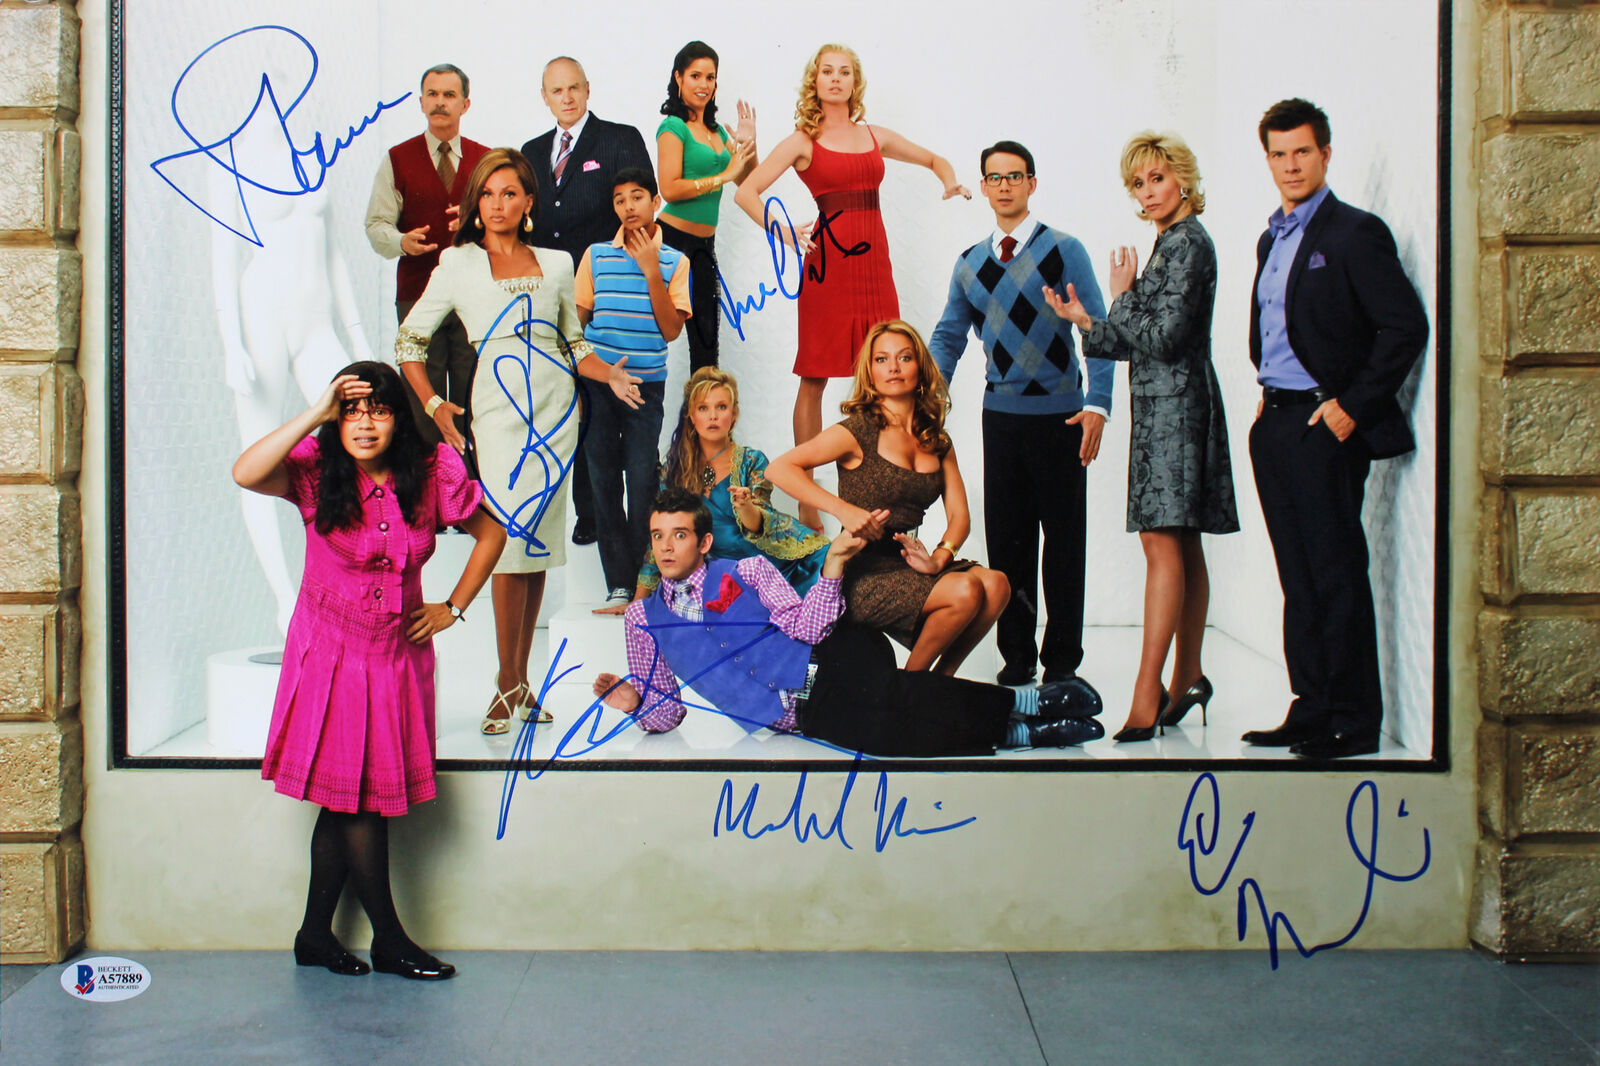 Ugly Betty (6) Ferrera, Mabius, Ortiz, Urie, +2 Signed 12x18 Photo Poster painting BAS #A57889